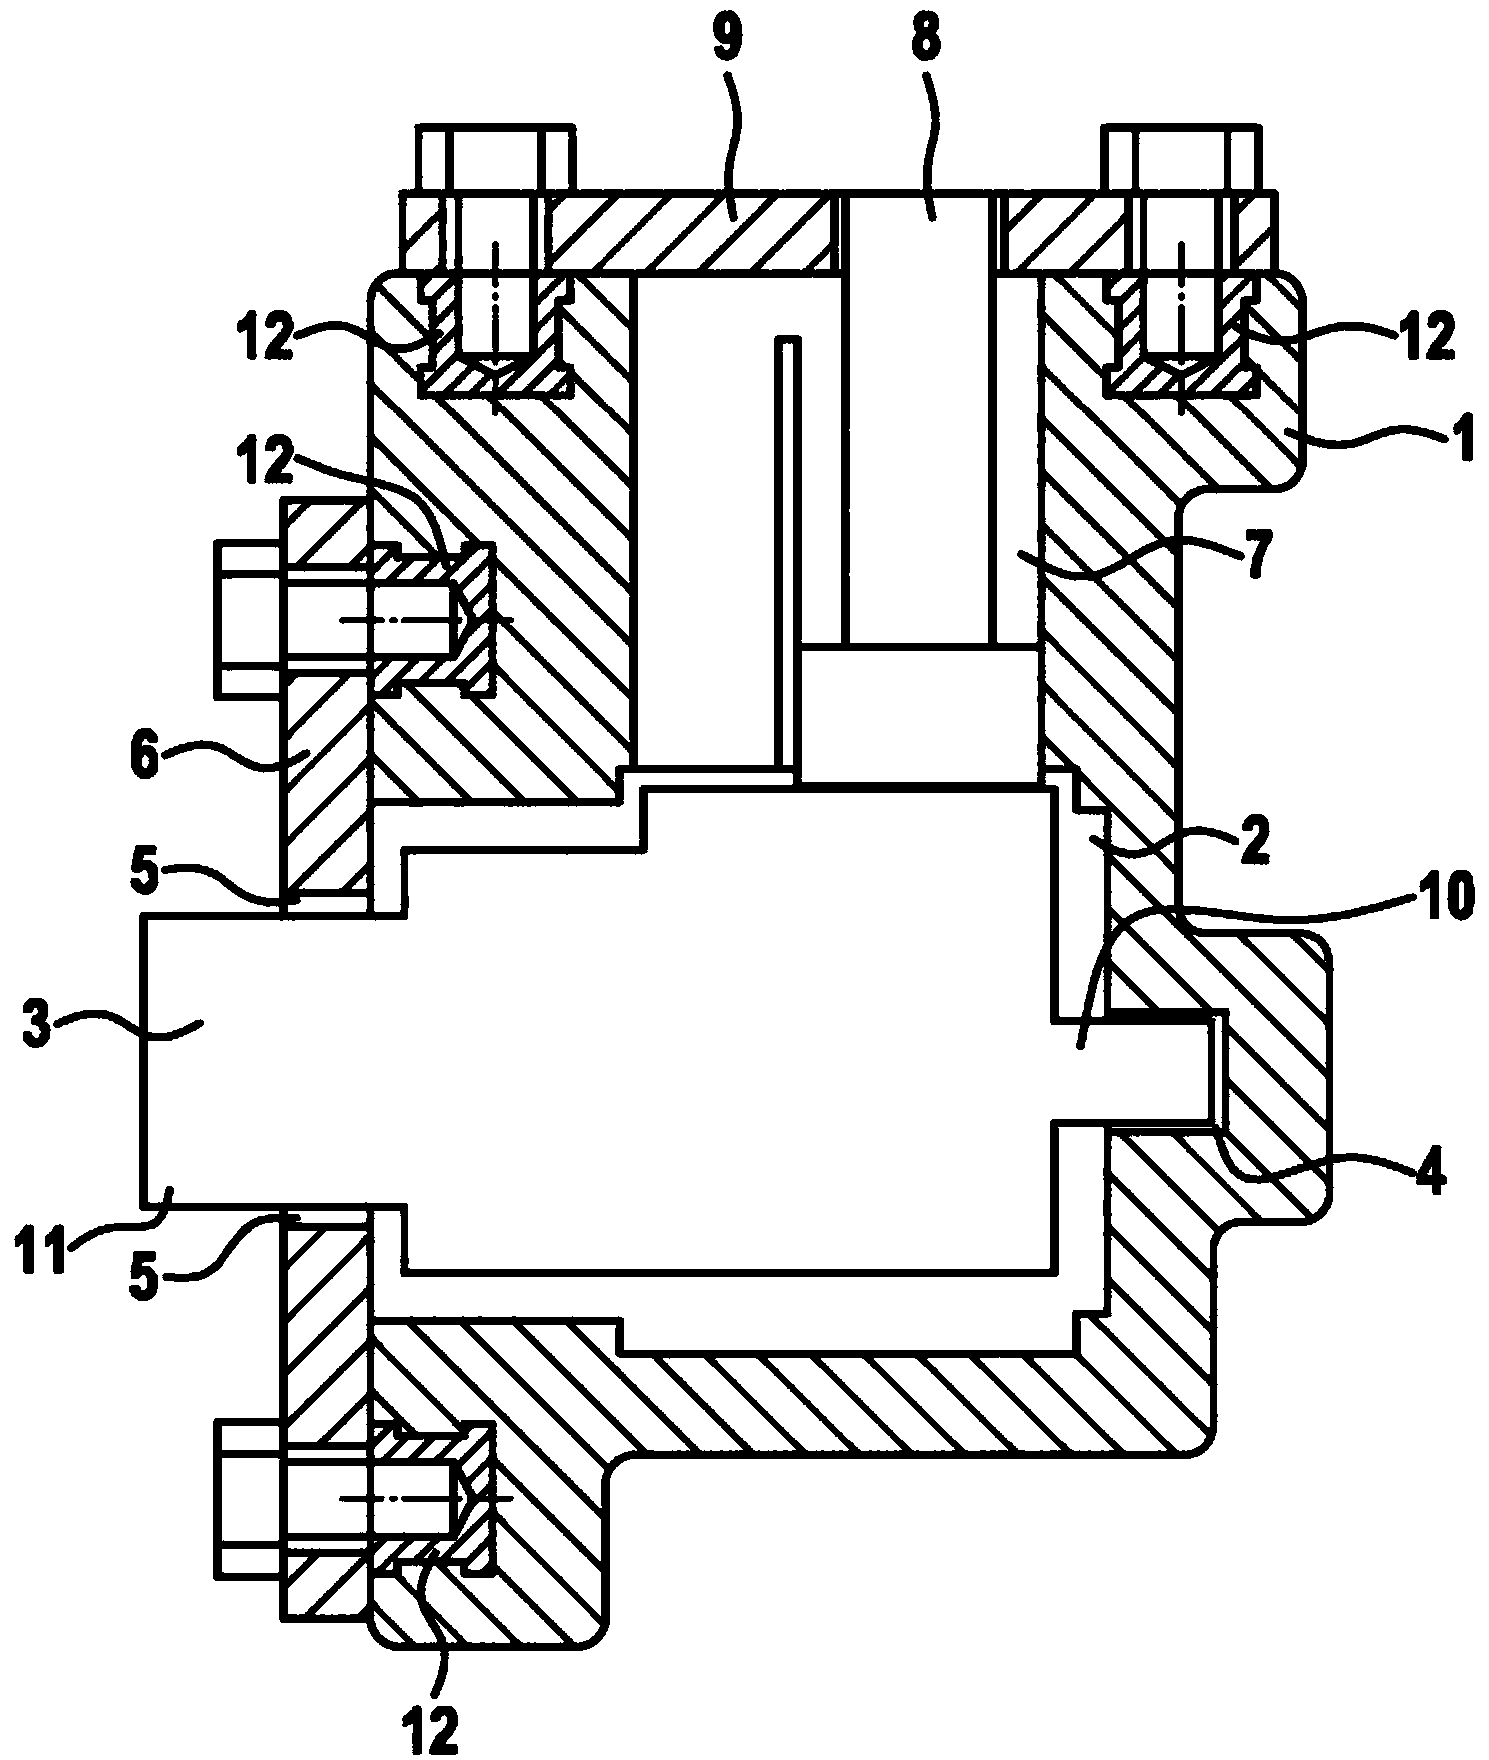 Method for producing a plastic housing